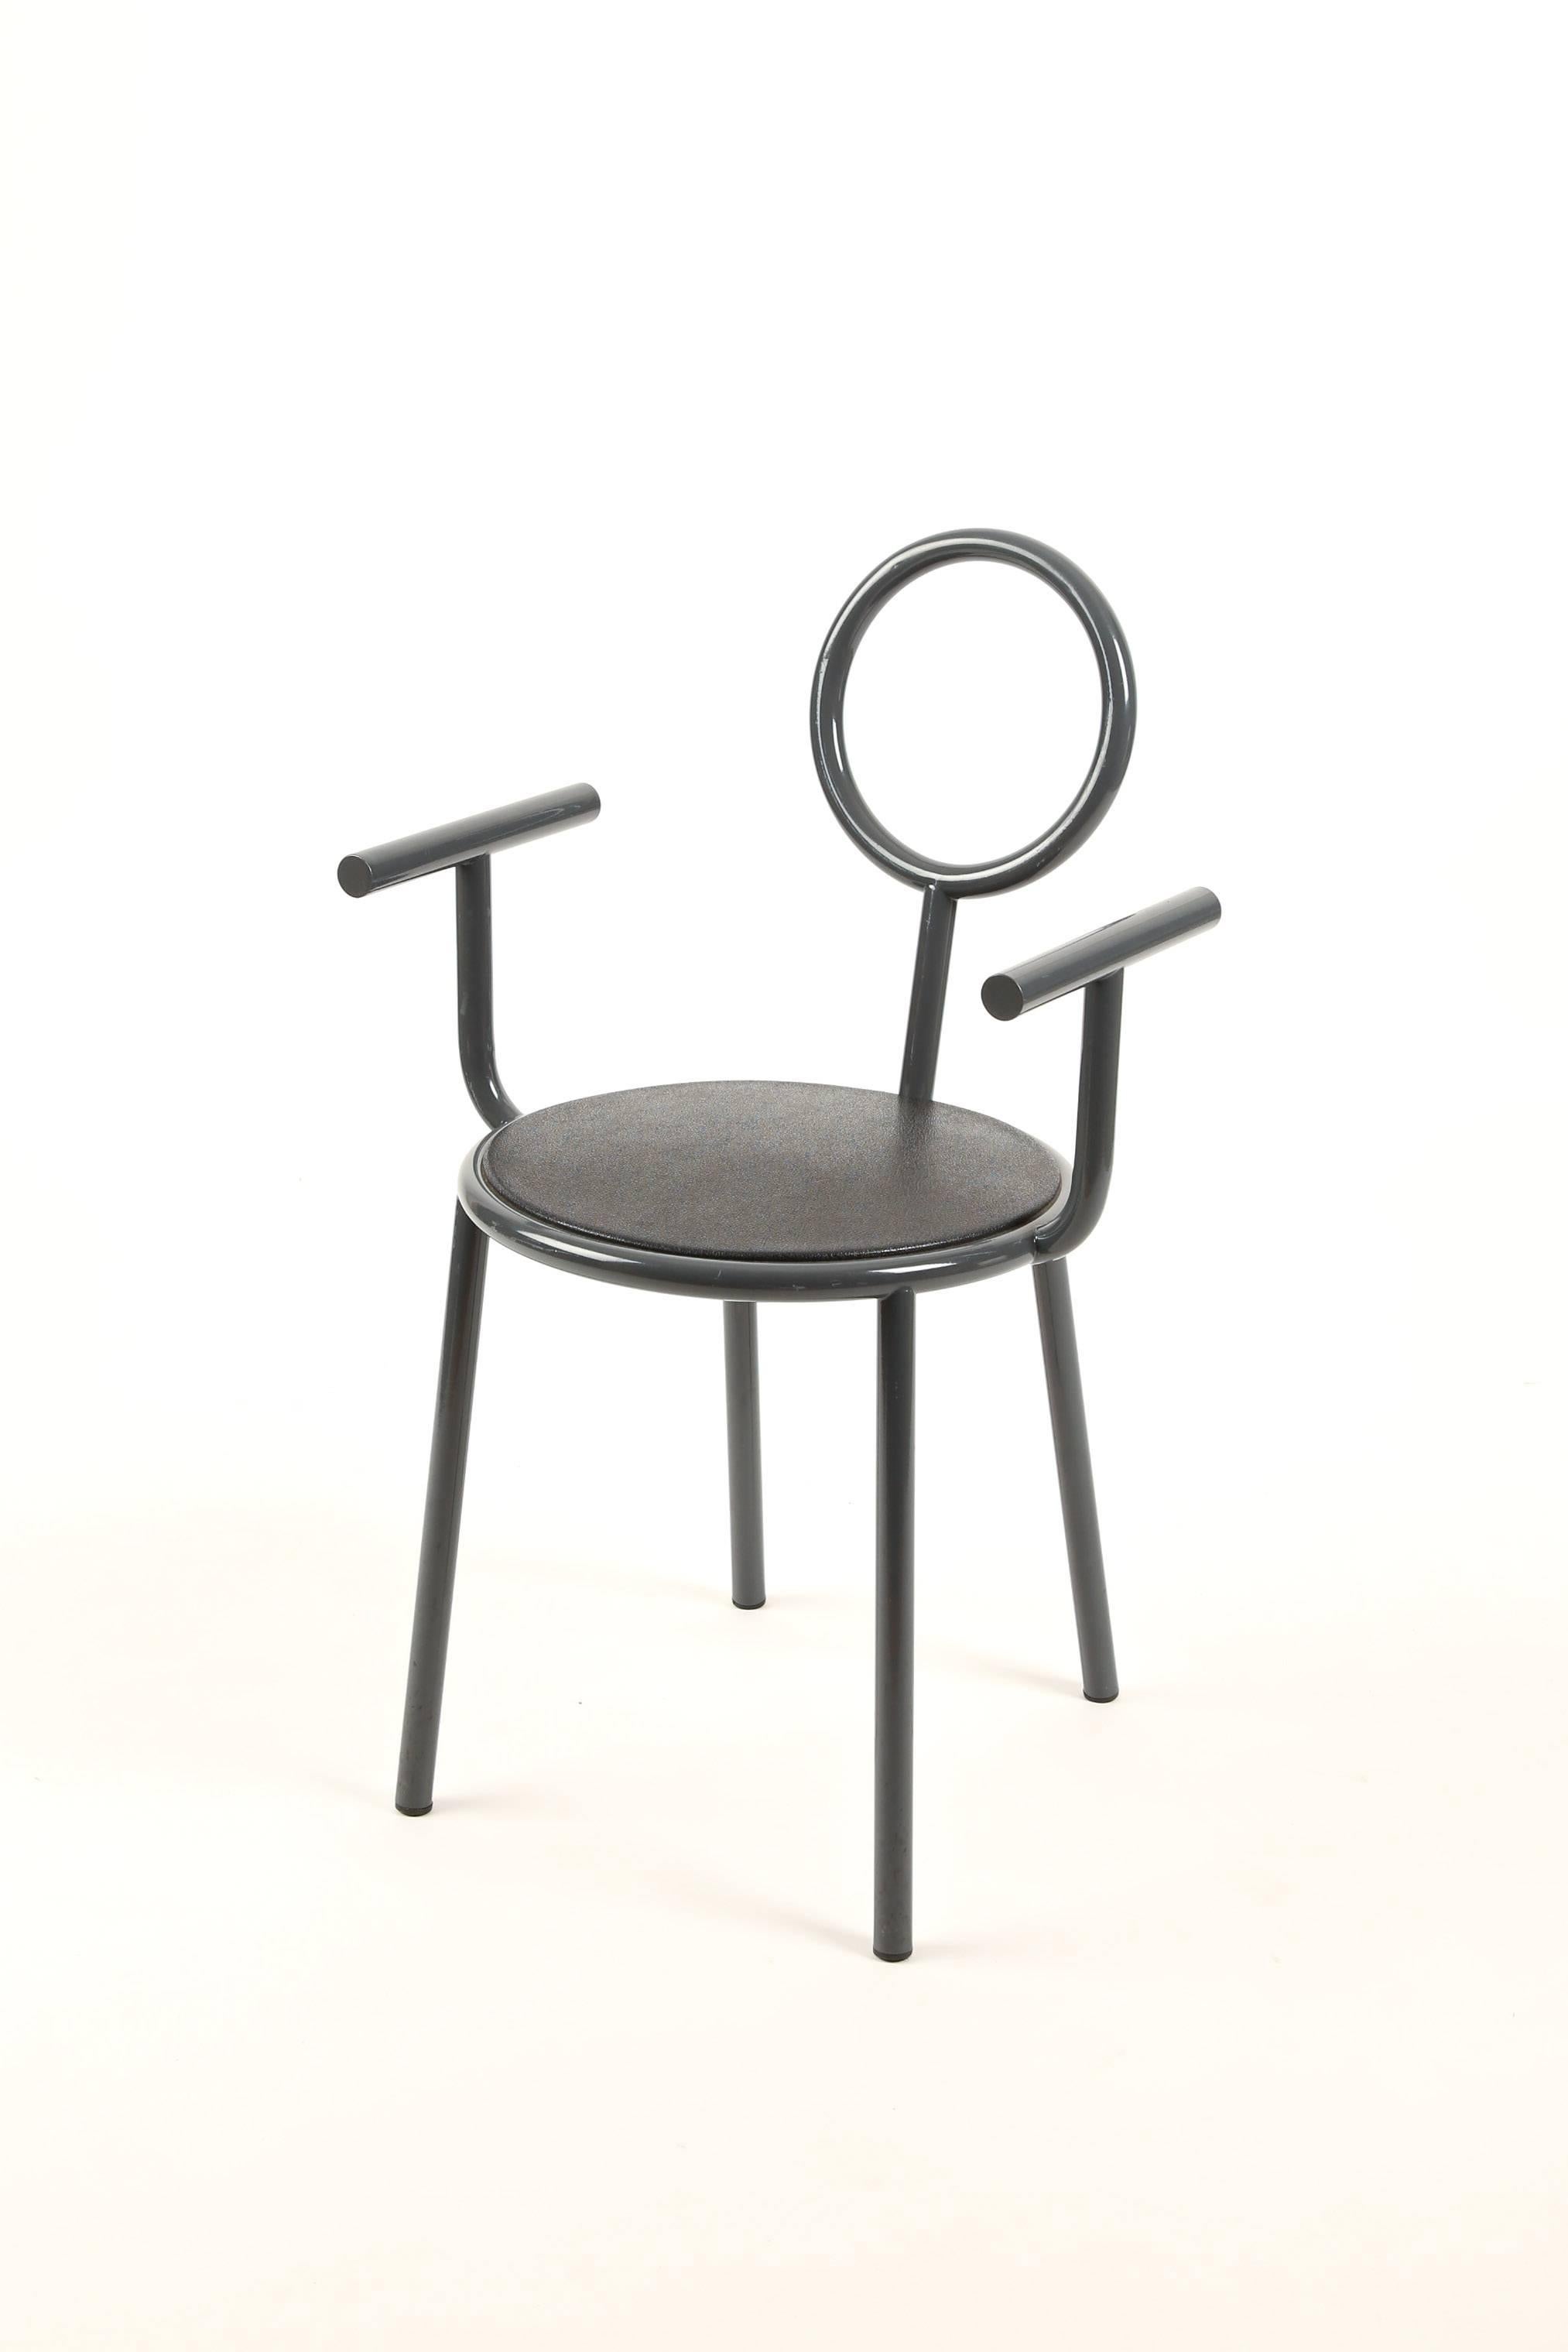 Post-Modern Stelline Memphis Chairs of Alessandro Mendini for Elam Uno, Alchimea Time For Sale